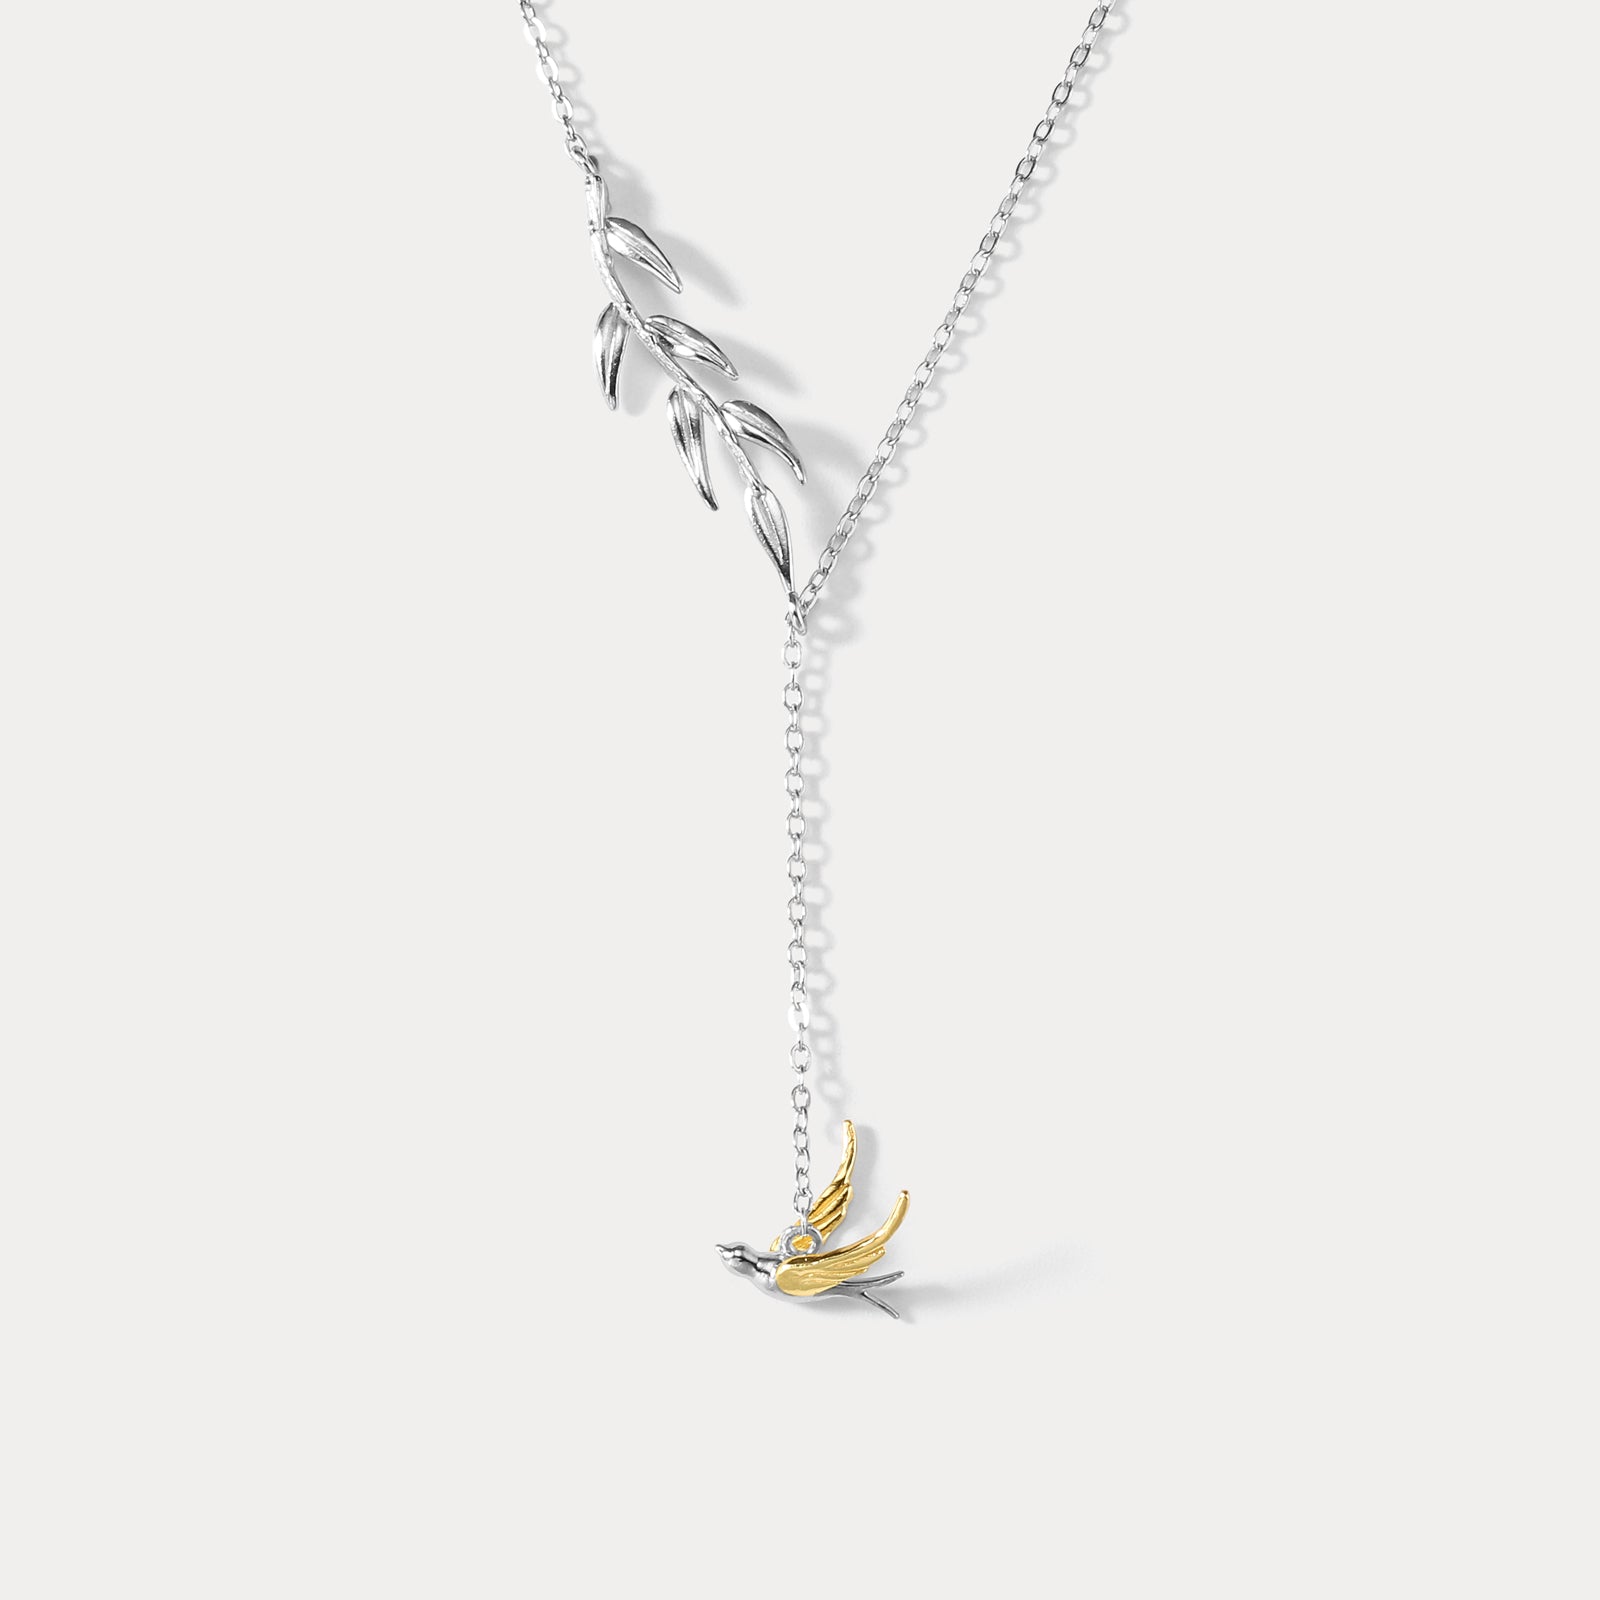 Selenichast Silver Swallow & Willow Necklace